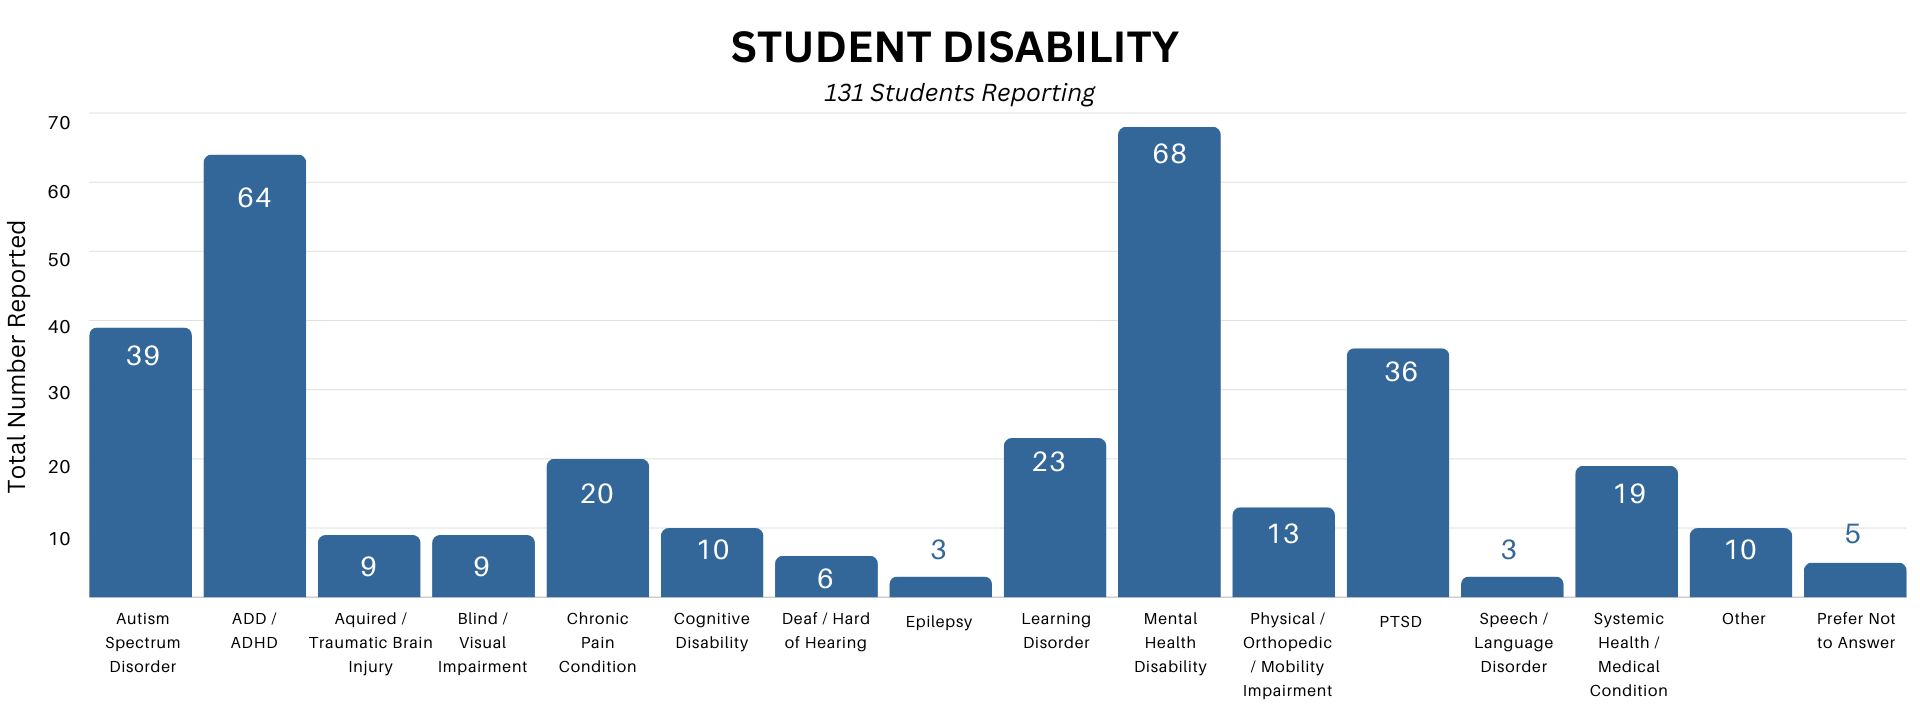 A bar graph indicating the total number of disabilities reported by alliance students.